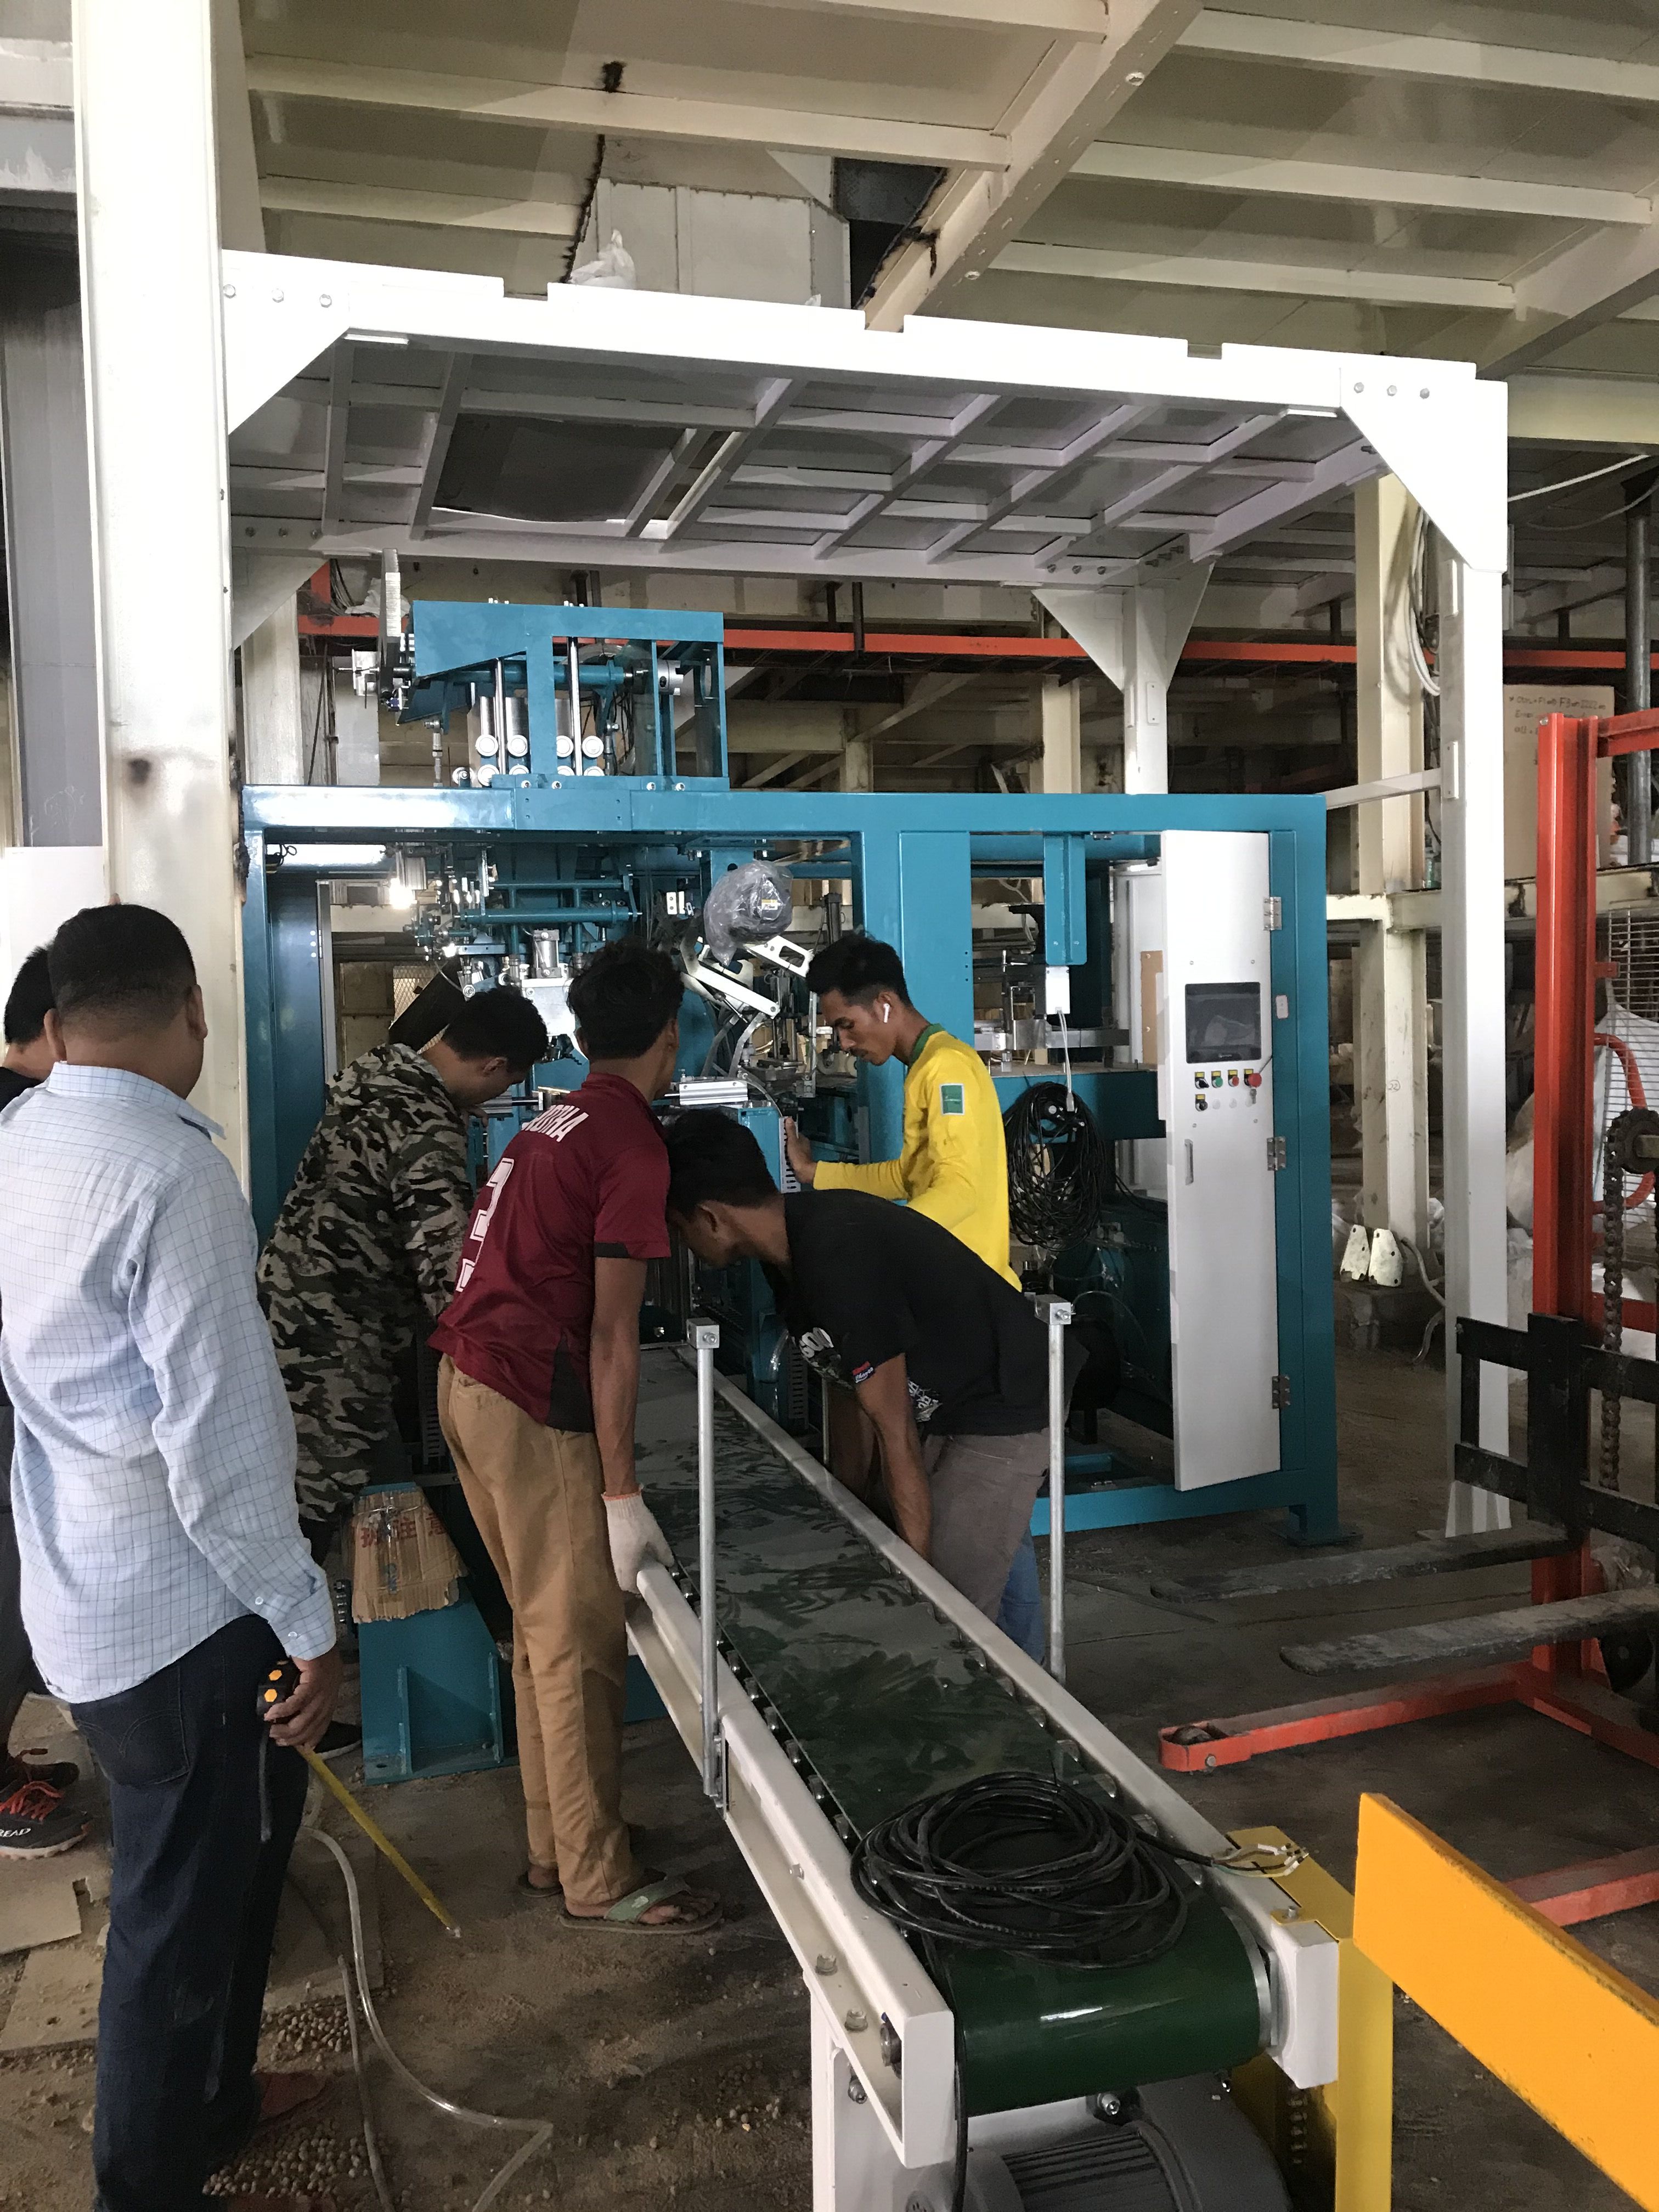 American proten powder fully automatic packaging line